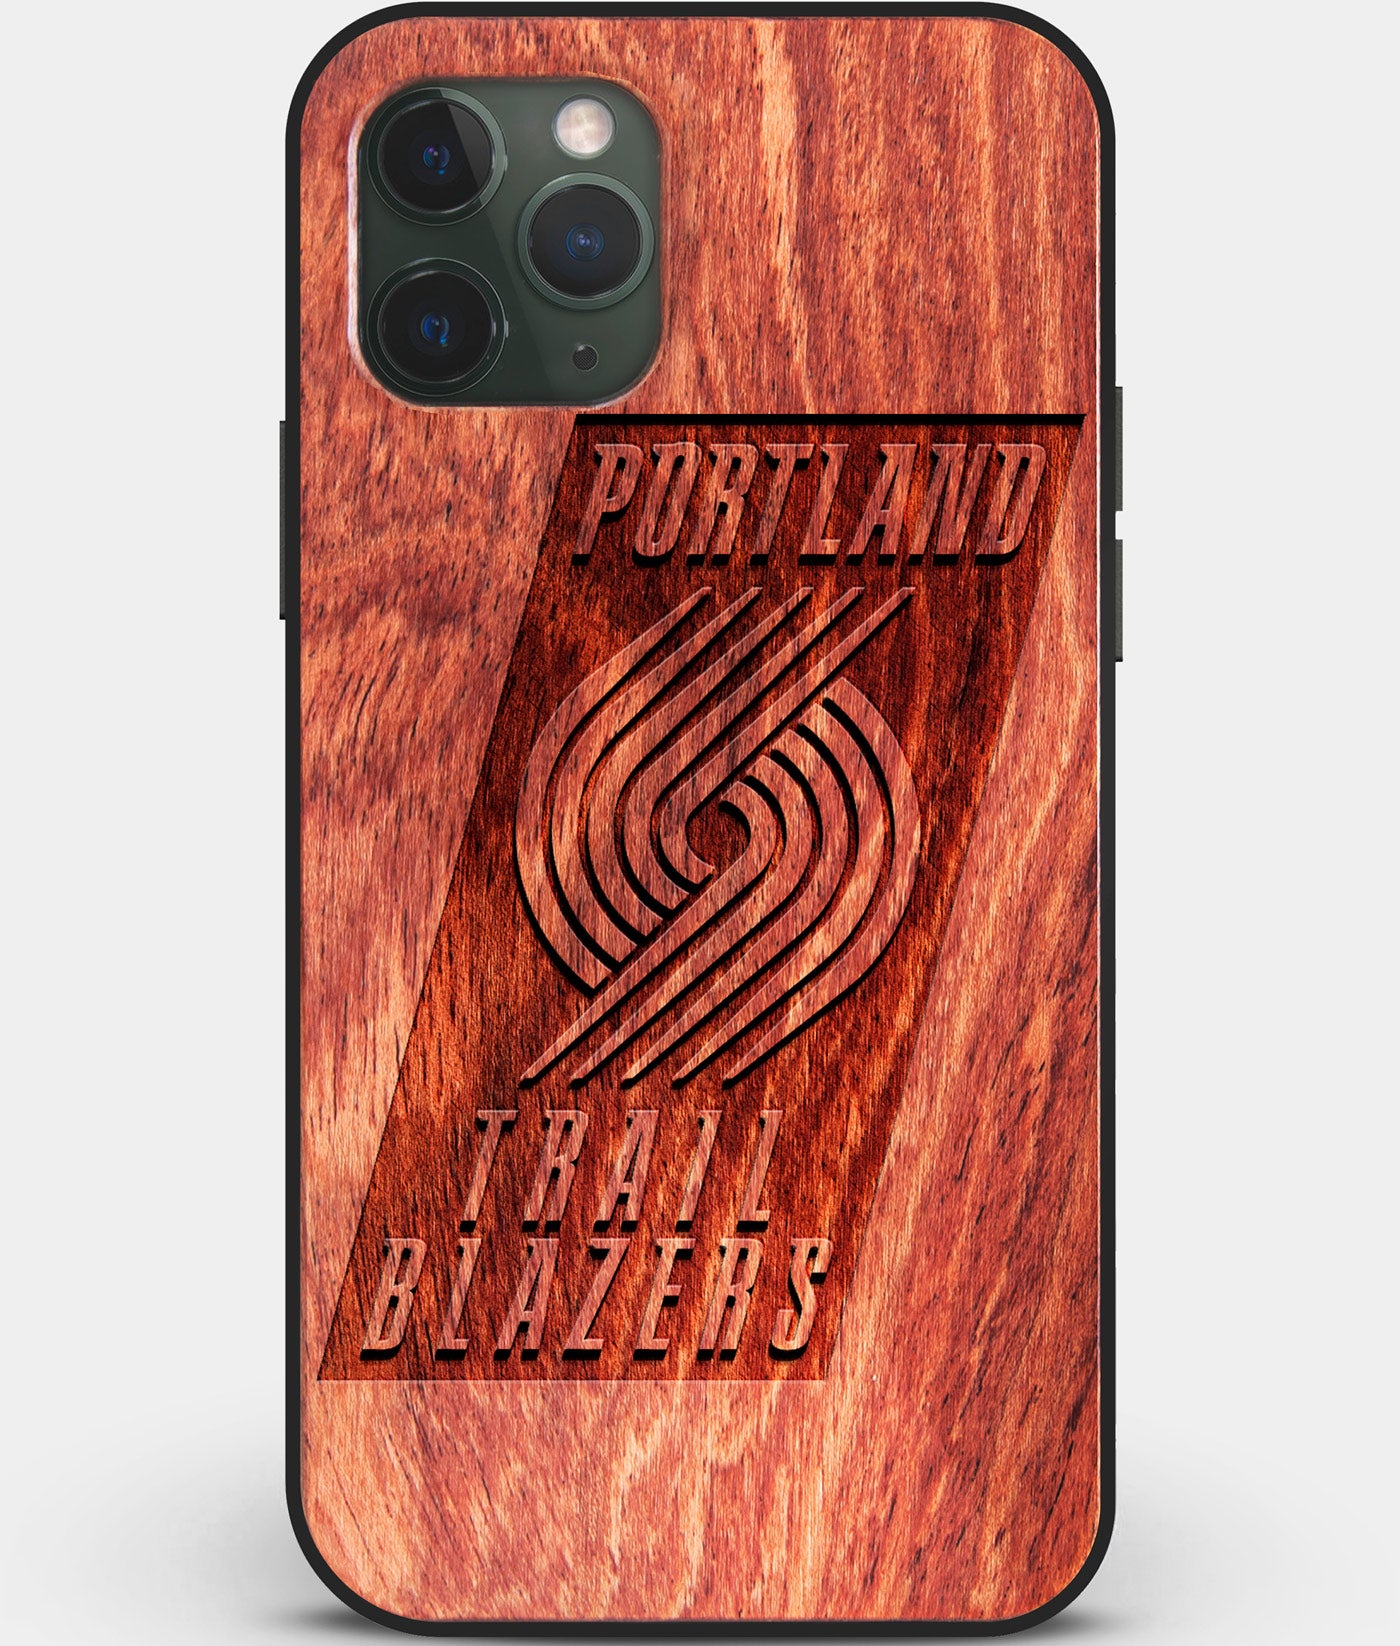 Custom Carved Wood Portland Trail Blazers iPhone 11 Pro Max Case | Personalized Mahogany Wood Portland Trail Blazers Cover, Birthday Gift, Gifts For Him, Monogrammed Gift For Fan | by Engraved In Nature